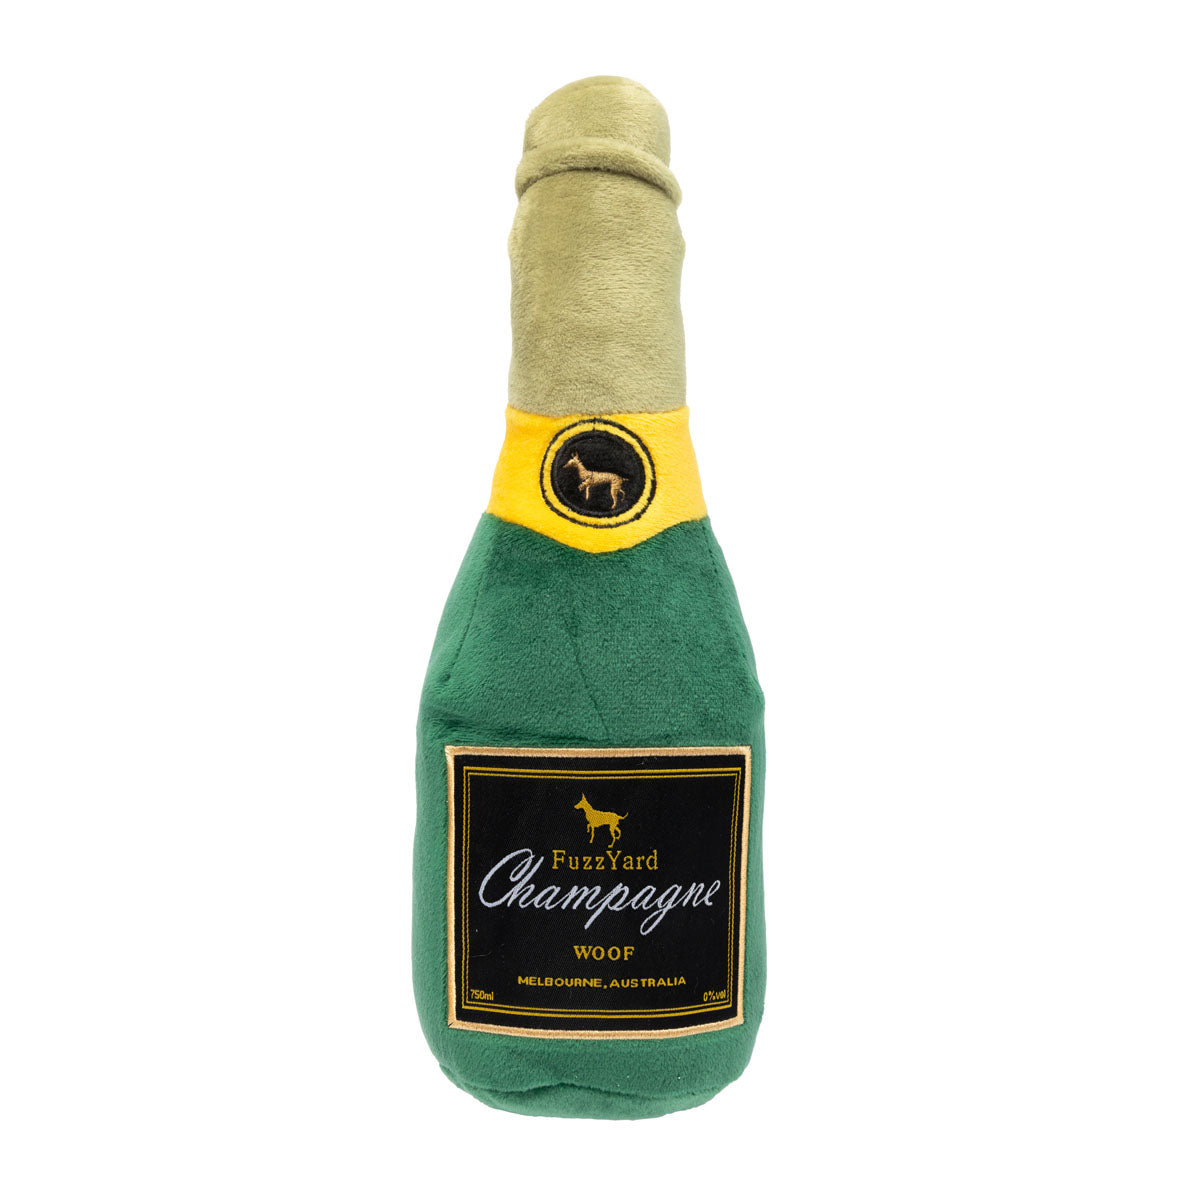 champagne-dog-toy